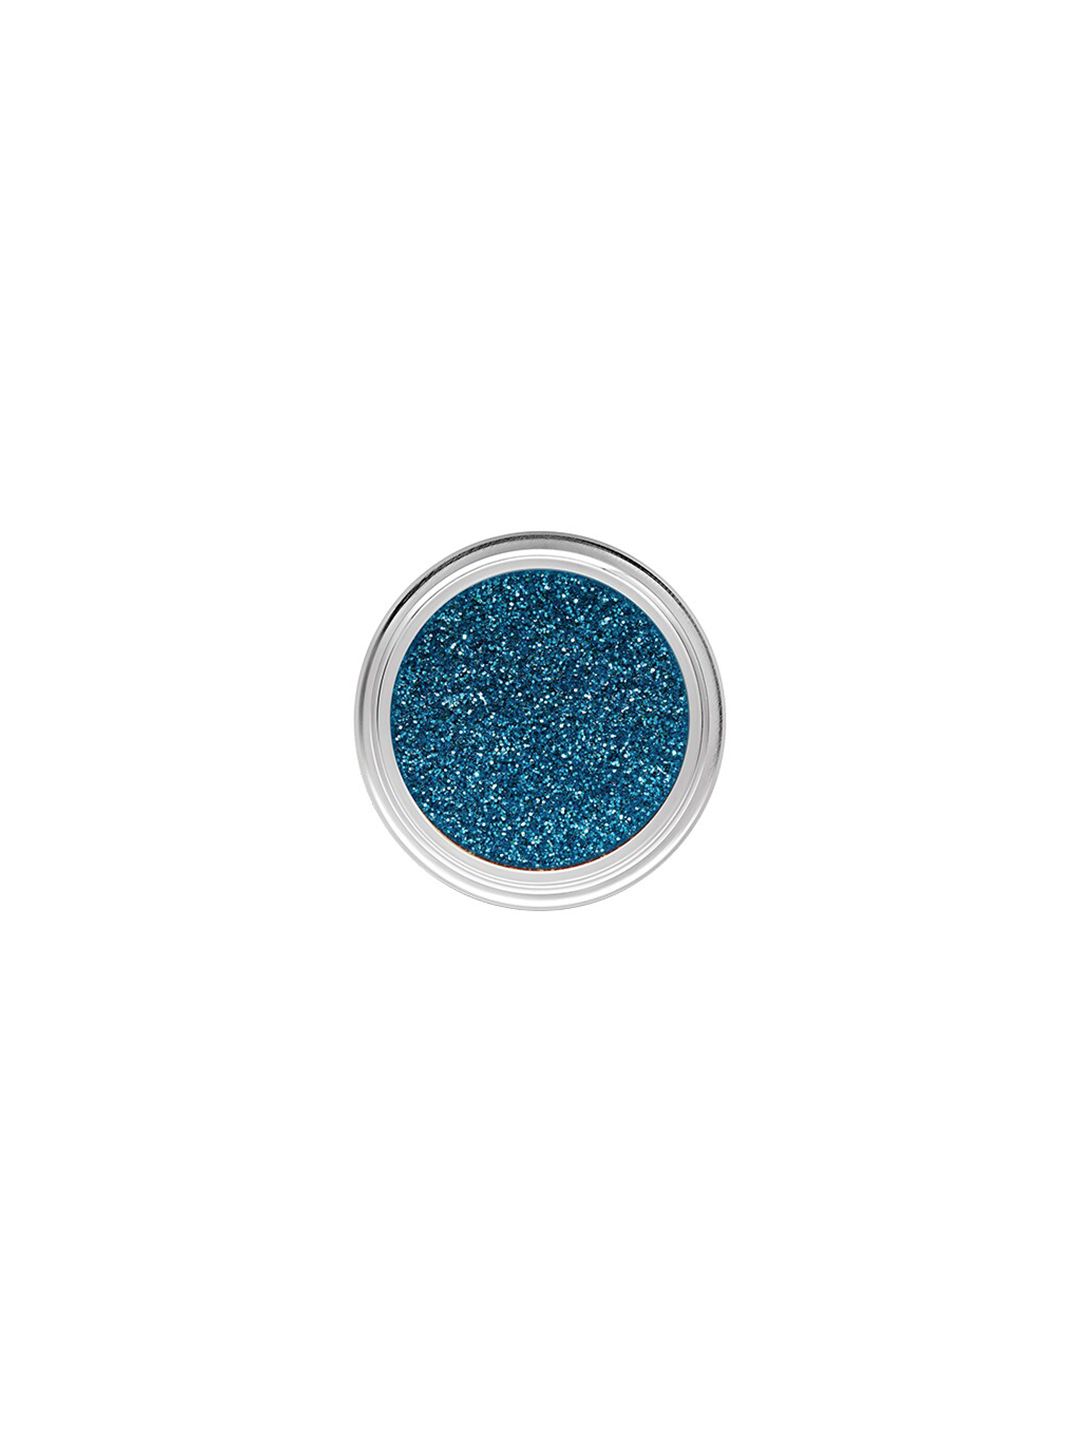 C2P PROFESSIONAL MAKEUP Uptown Loose Glitters Eyeshadow - Fantasy Blue 04 Price in India